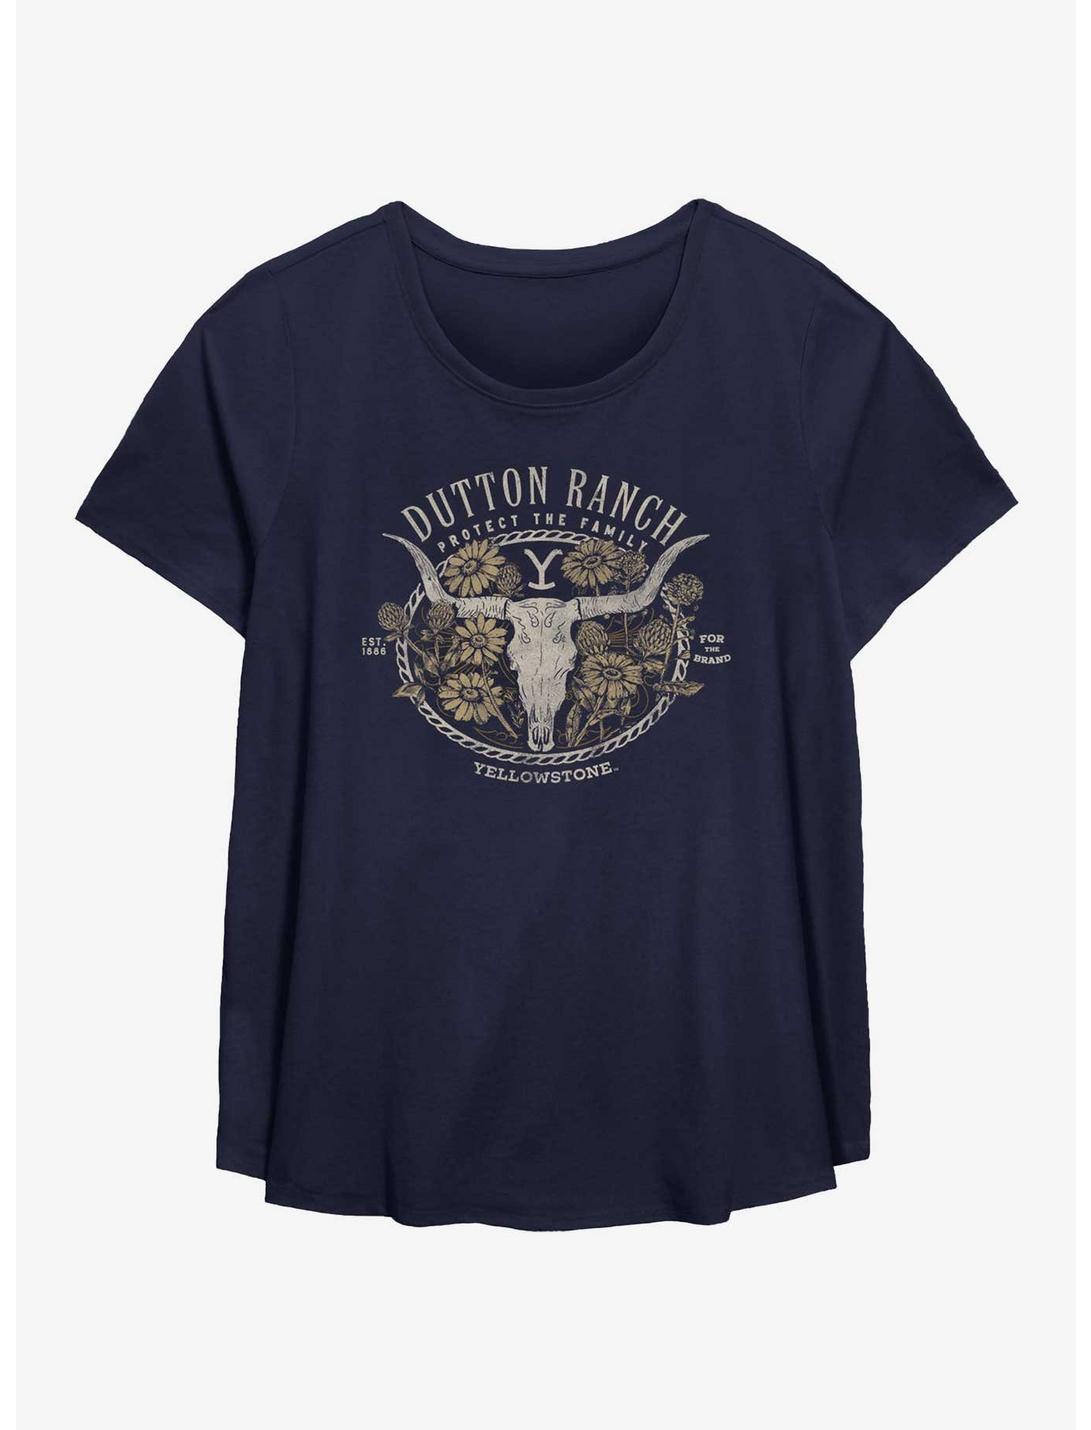 Yellowstone Dutton Ranch Protect The Family Floral Womens T-Shirt Plus Size, NAVY, hi-res